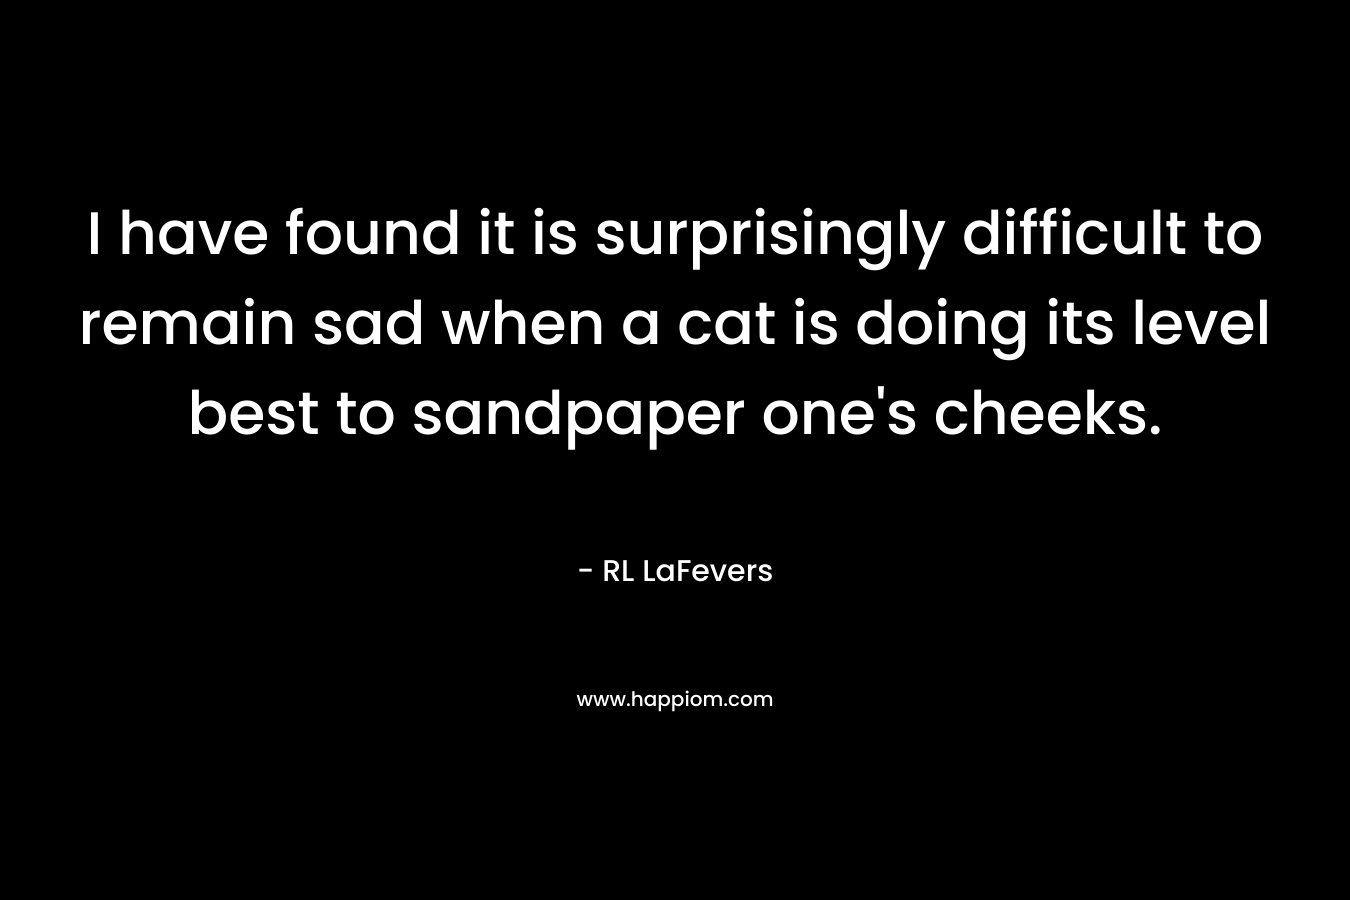 I have found it is surprisingly difficult to remain sad when a cat is doing its level best to sandpaper one’s cheeks. – RL LaFevers